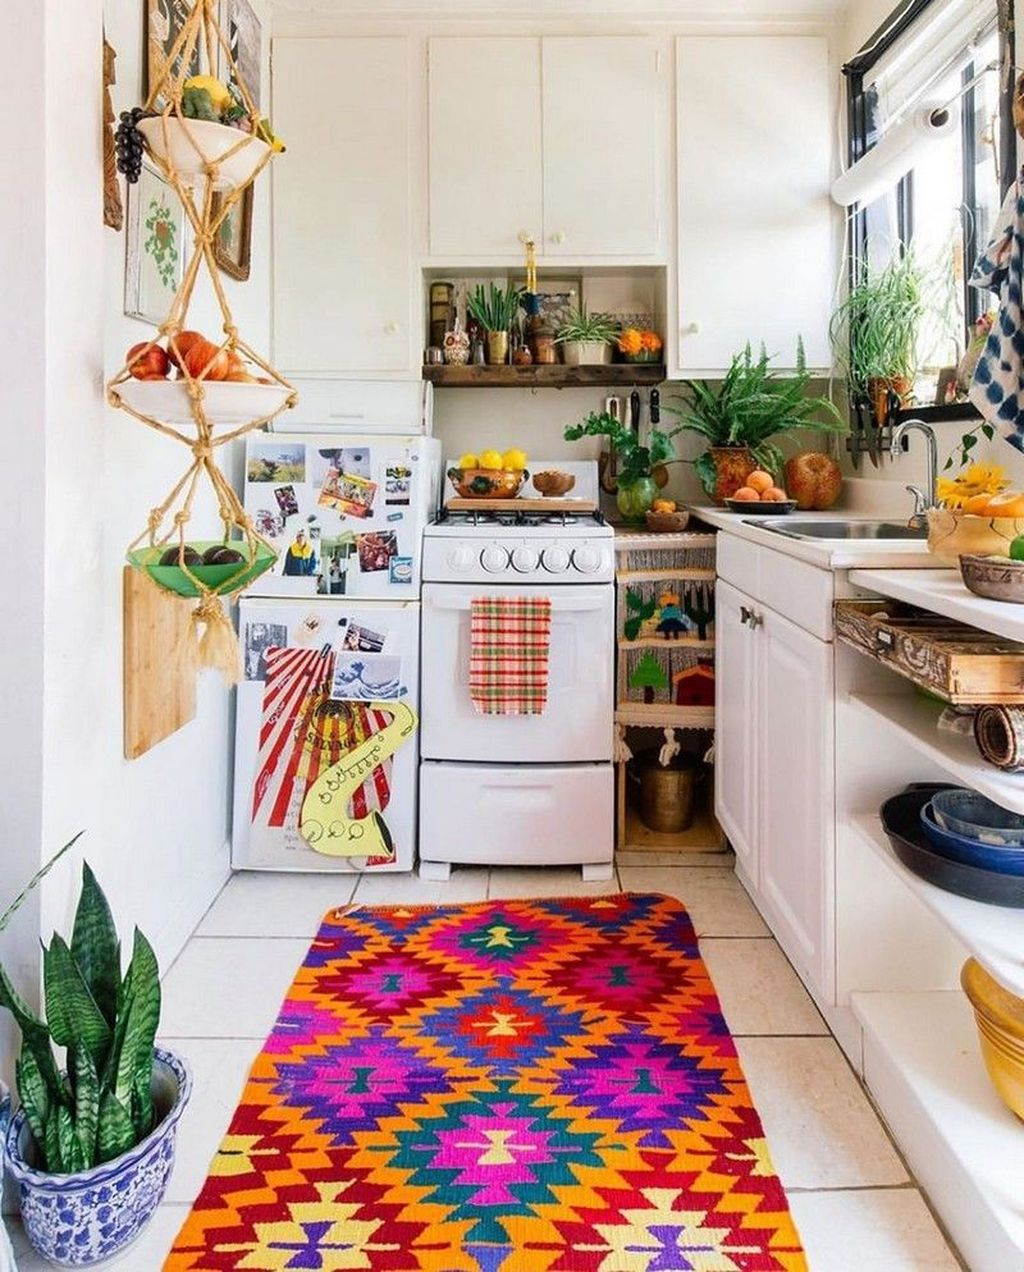 Awesome Bohemian Kitchen Design Ideas For Comfortable Cooking25